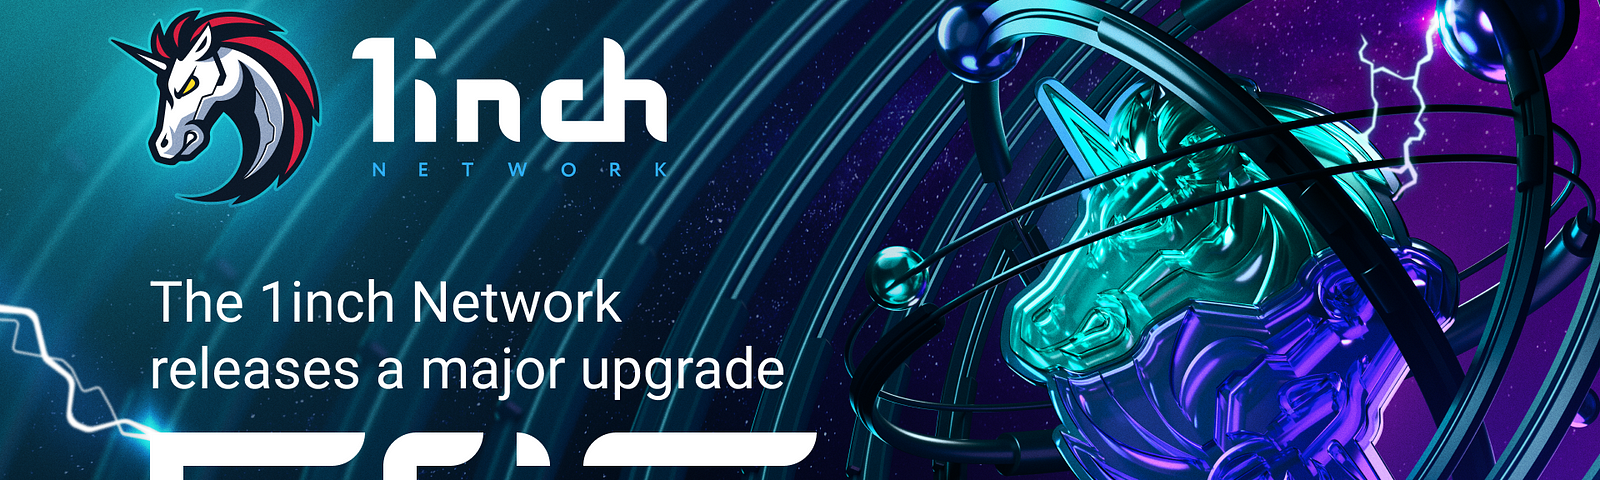 The 1inch Network releases a major upgrade, Fusion